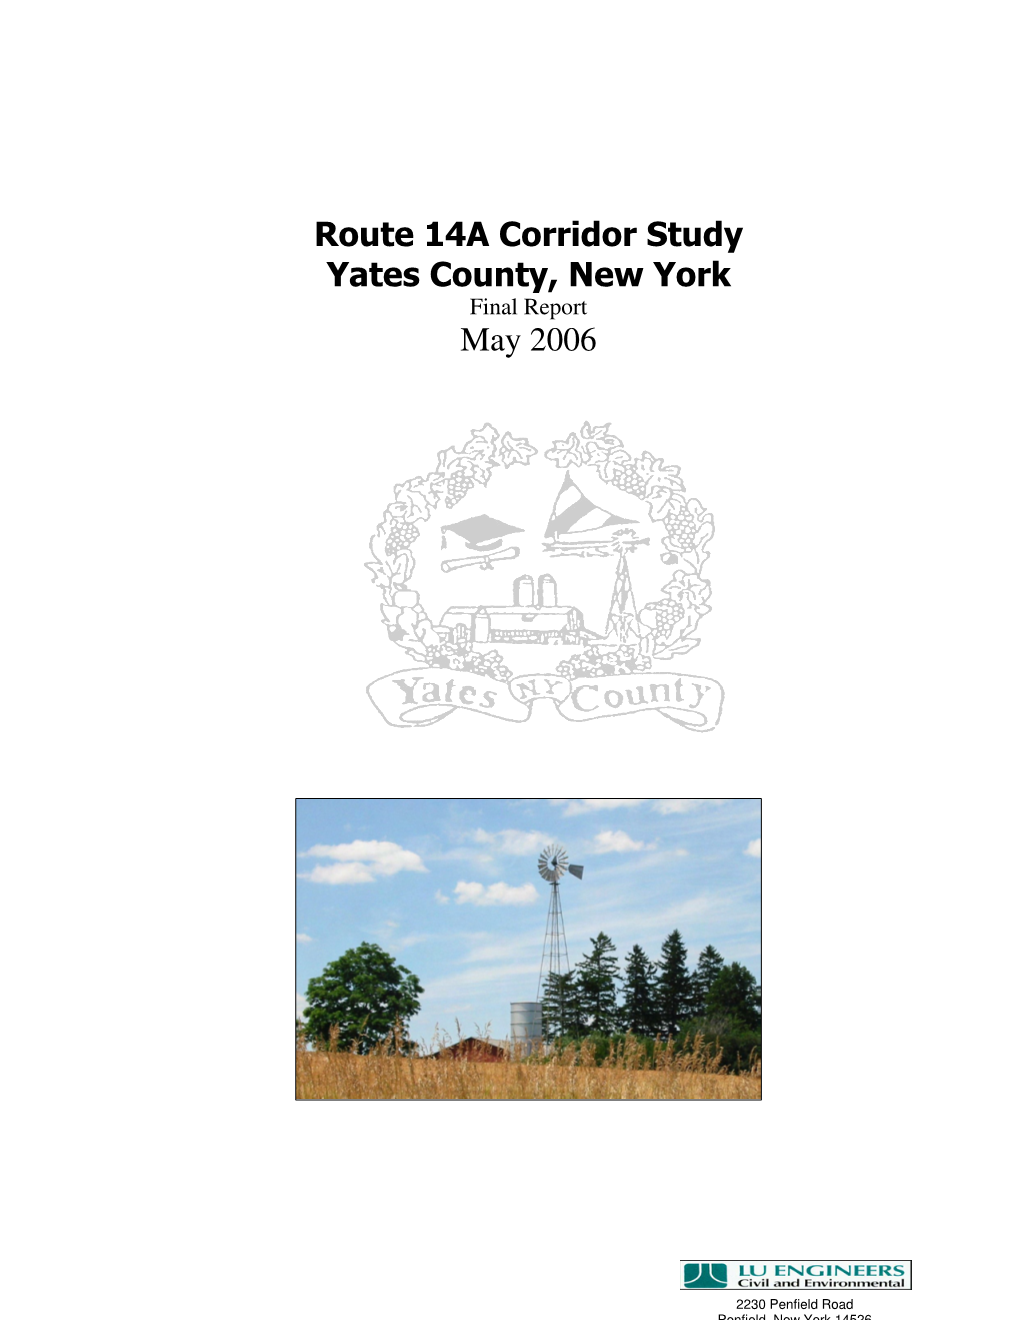 Route 14A Corridor Study Yates County, New York May 2006